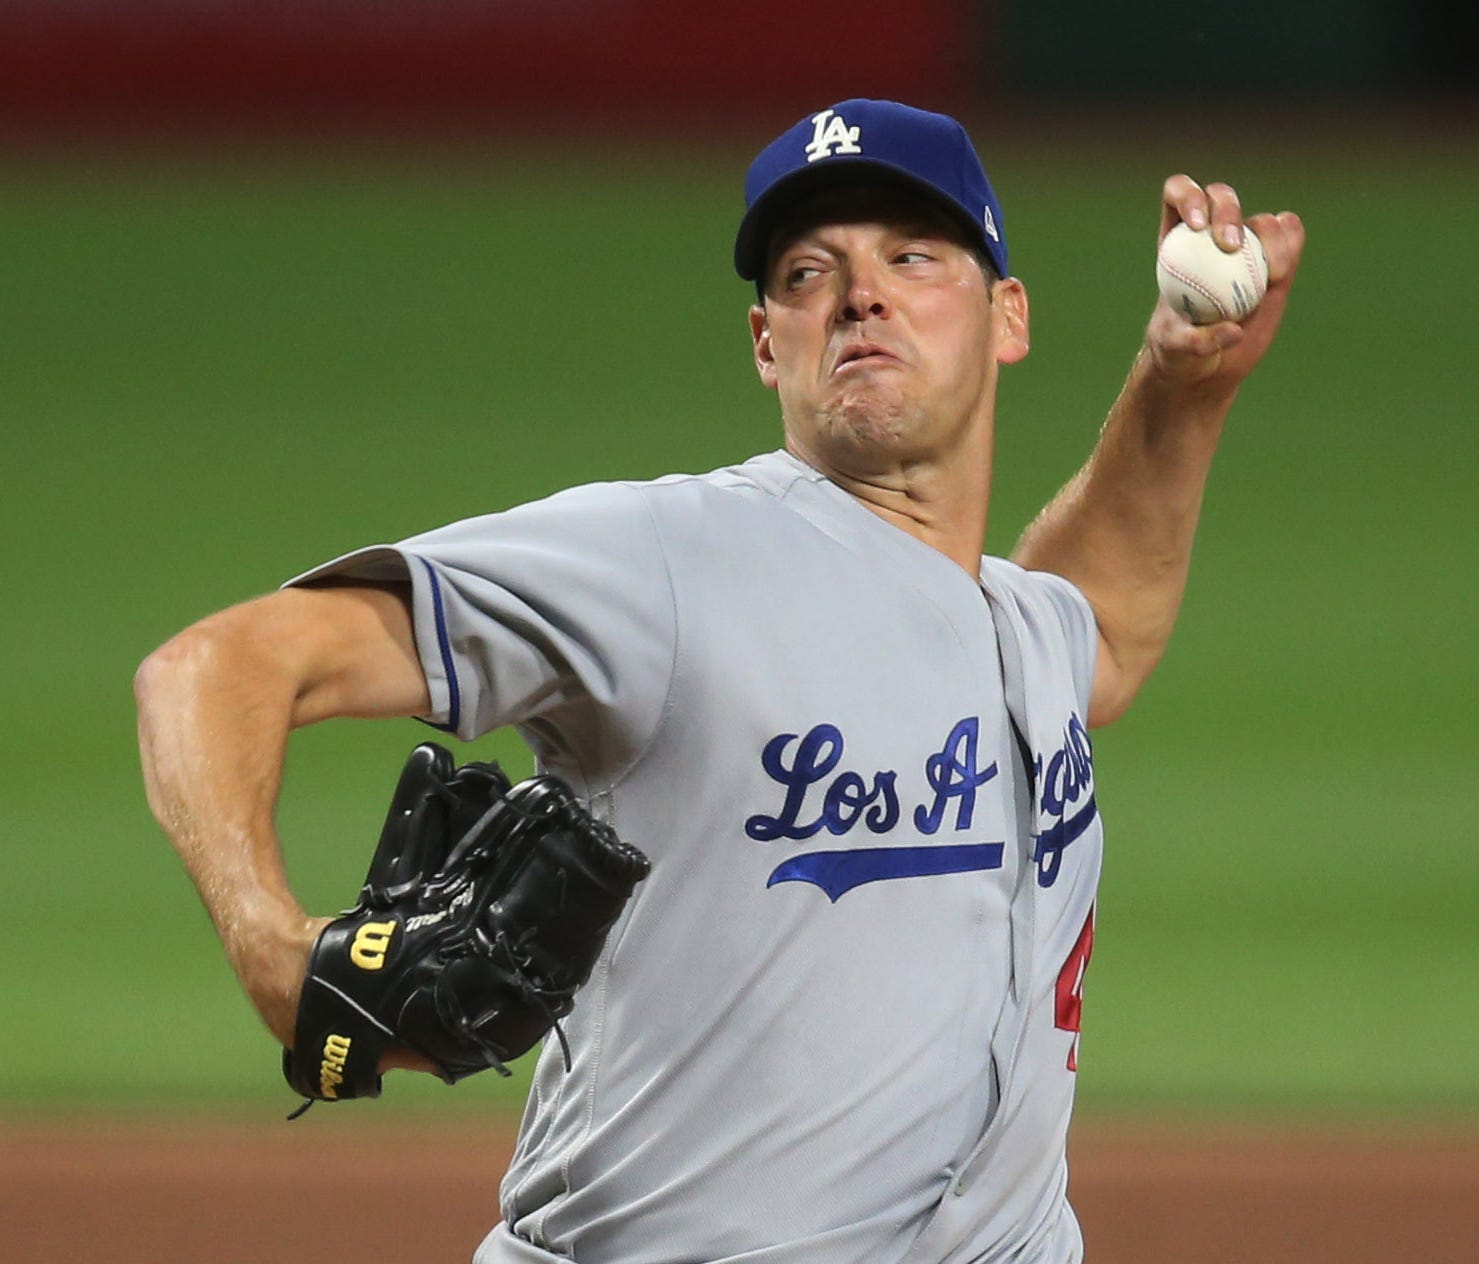 Dodgers starting pitcher Rich Hill fires a pitch against the Pirates during the fifth inning at PNC Park in Pittsburgh.